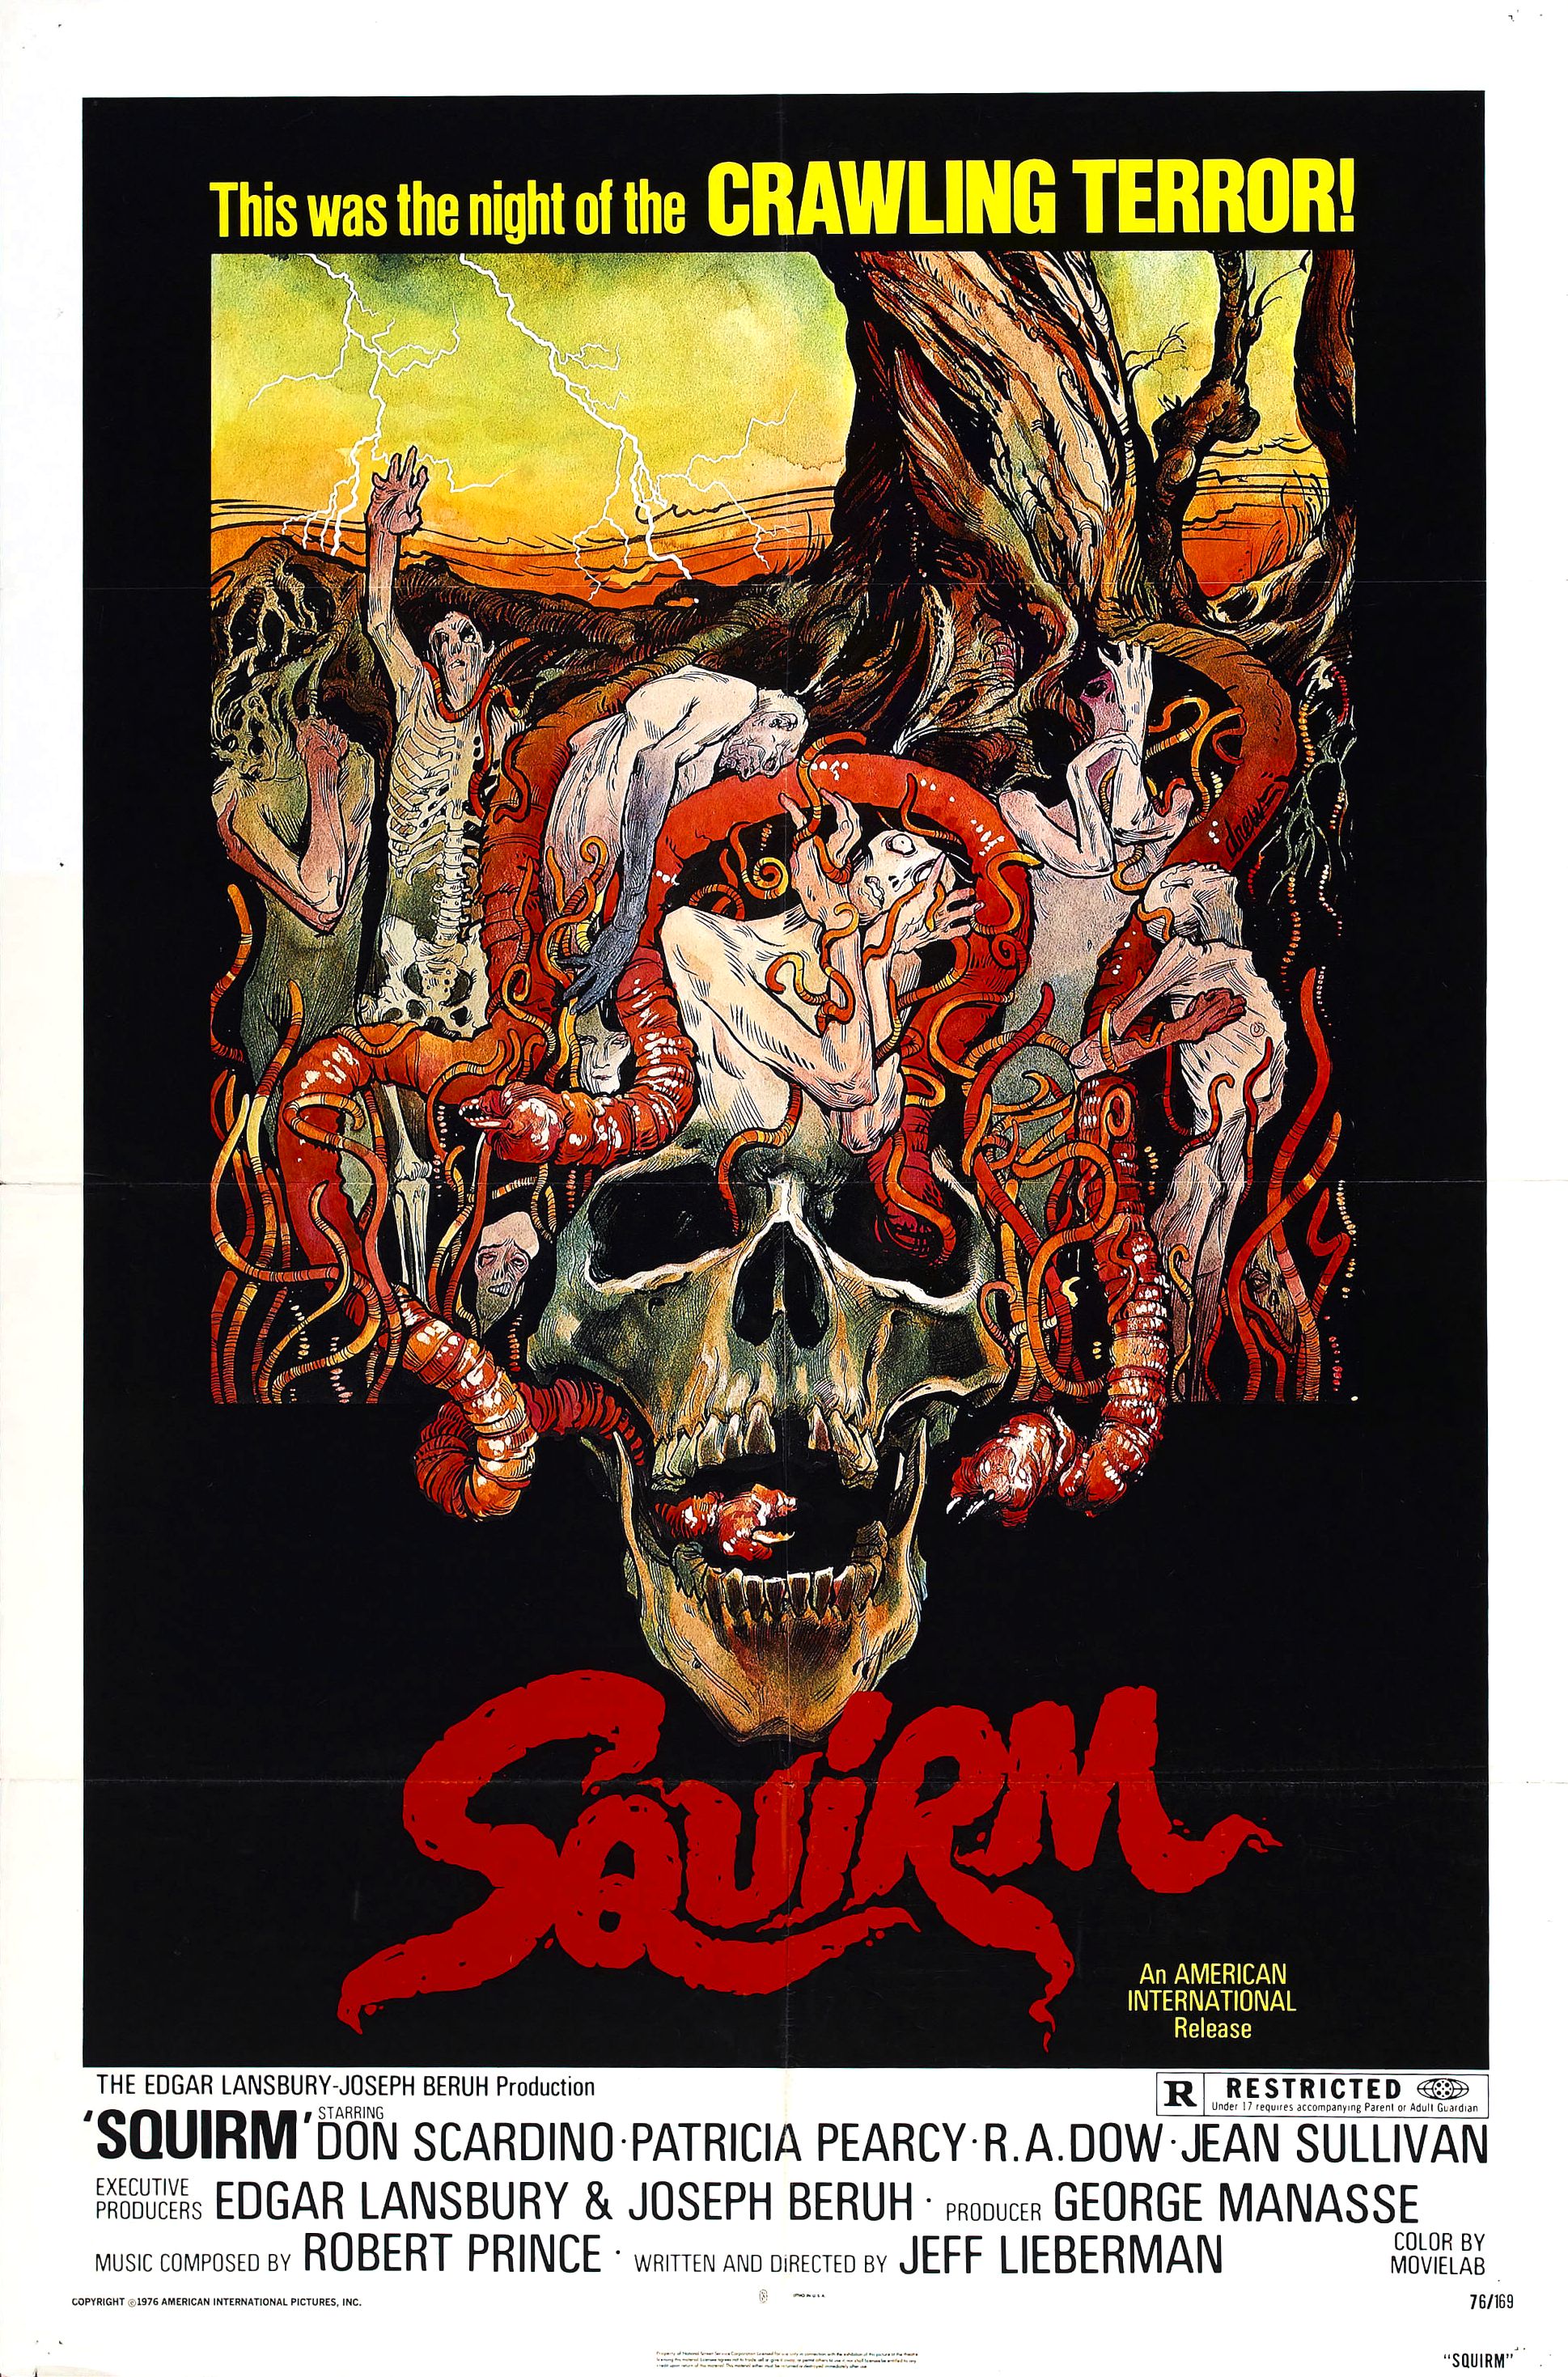 squirm poster - This was the night of the Crawling Terror! R Resthicted Squirm Don Scardino Patricia Pearcy R.Adow Ean Sullivan Edgar Lansbury & Joseph Beruh George Manasse Wisdom Robert Prince Windchde Jeff Lieberman